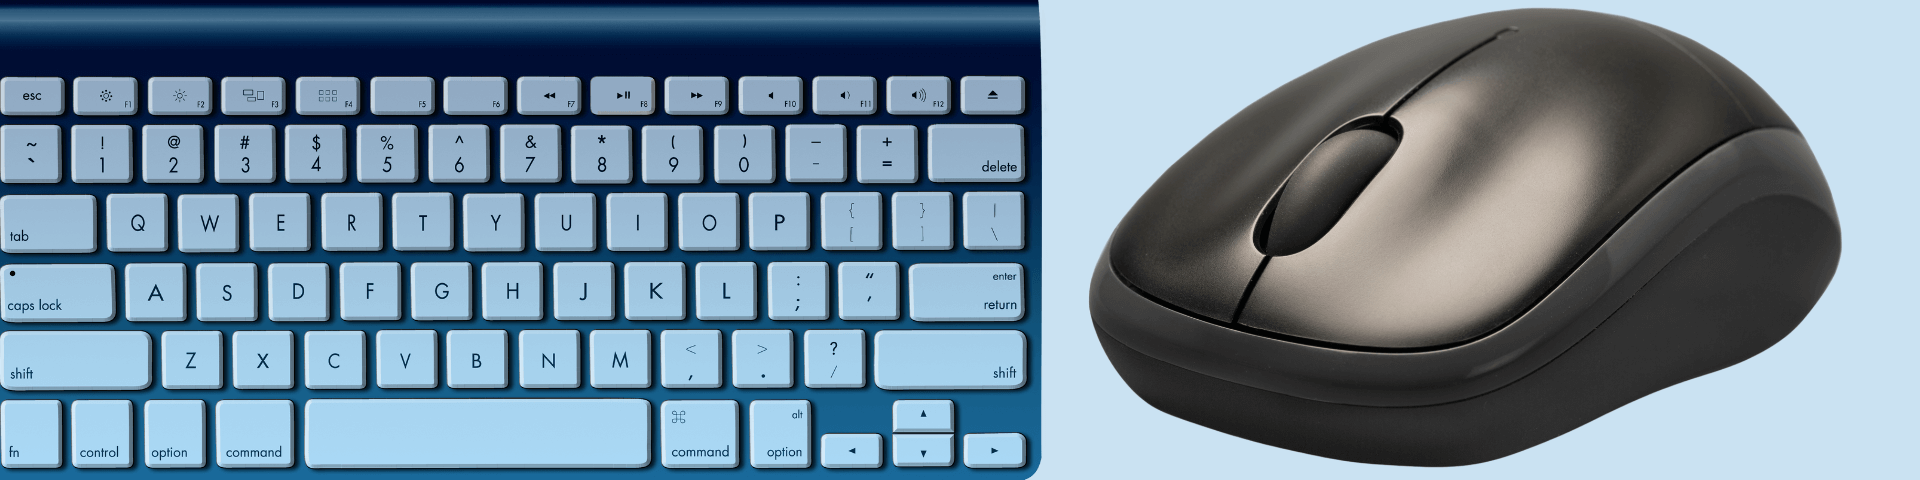 input devices keyboard mouse